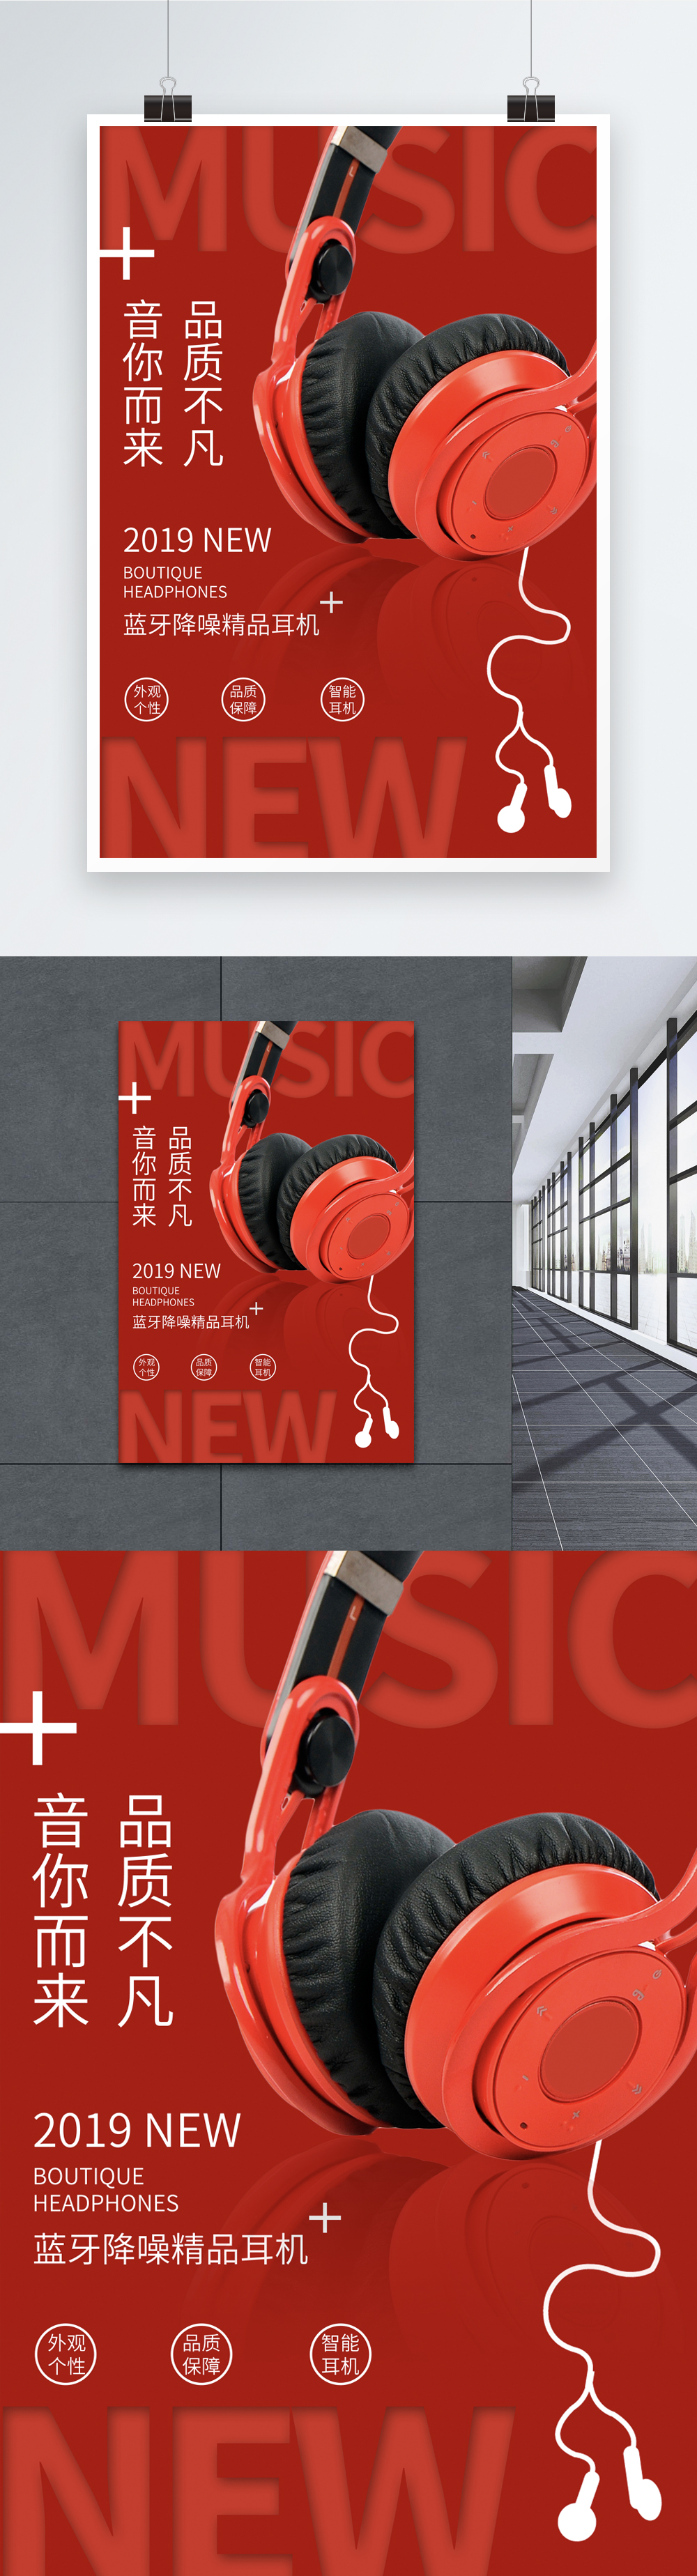 Download Yellow Music Cartoon Headphone Poster Template Template Image Picture Free Download 450019061 Lovepik Com PSD Mockup Templates